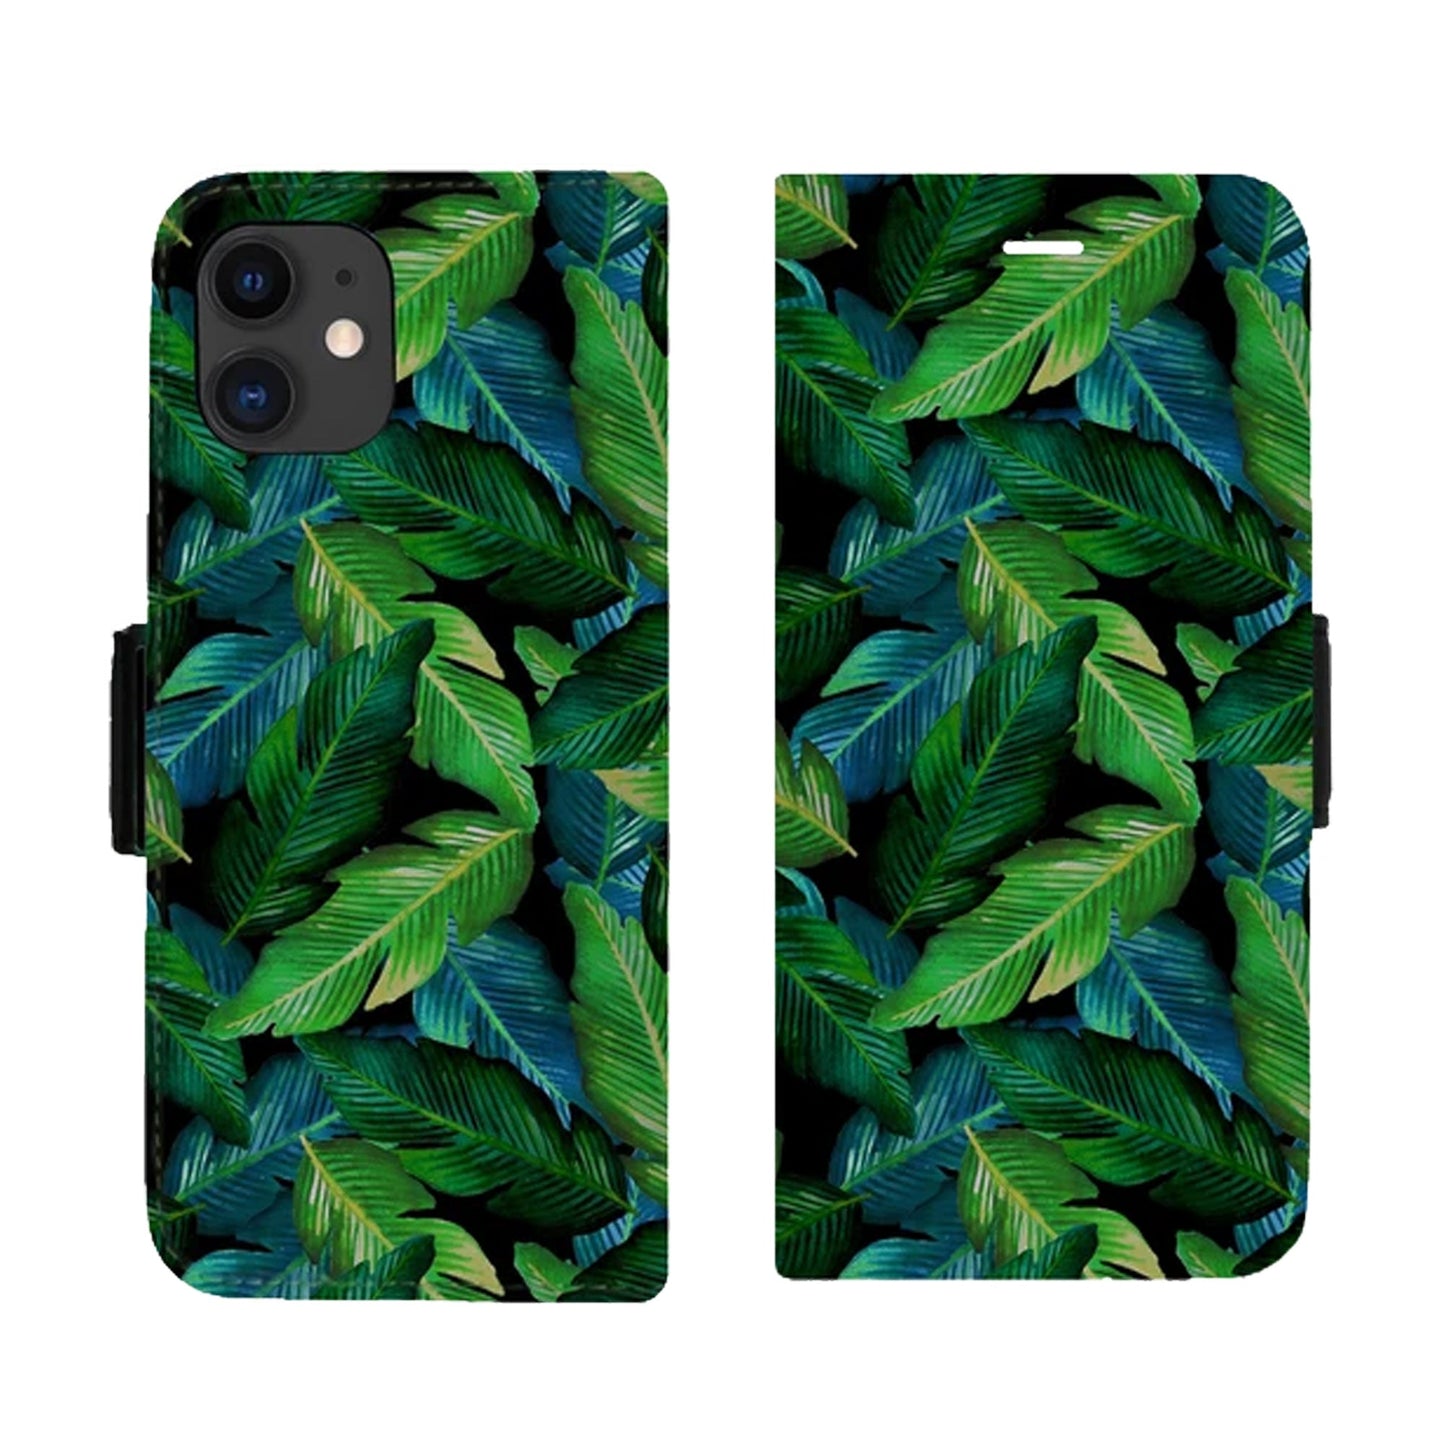 Tropical Victor Case for iPhone 11 